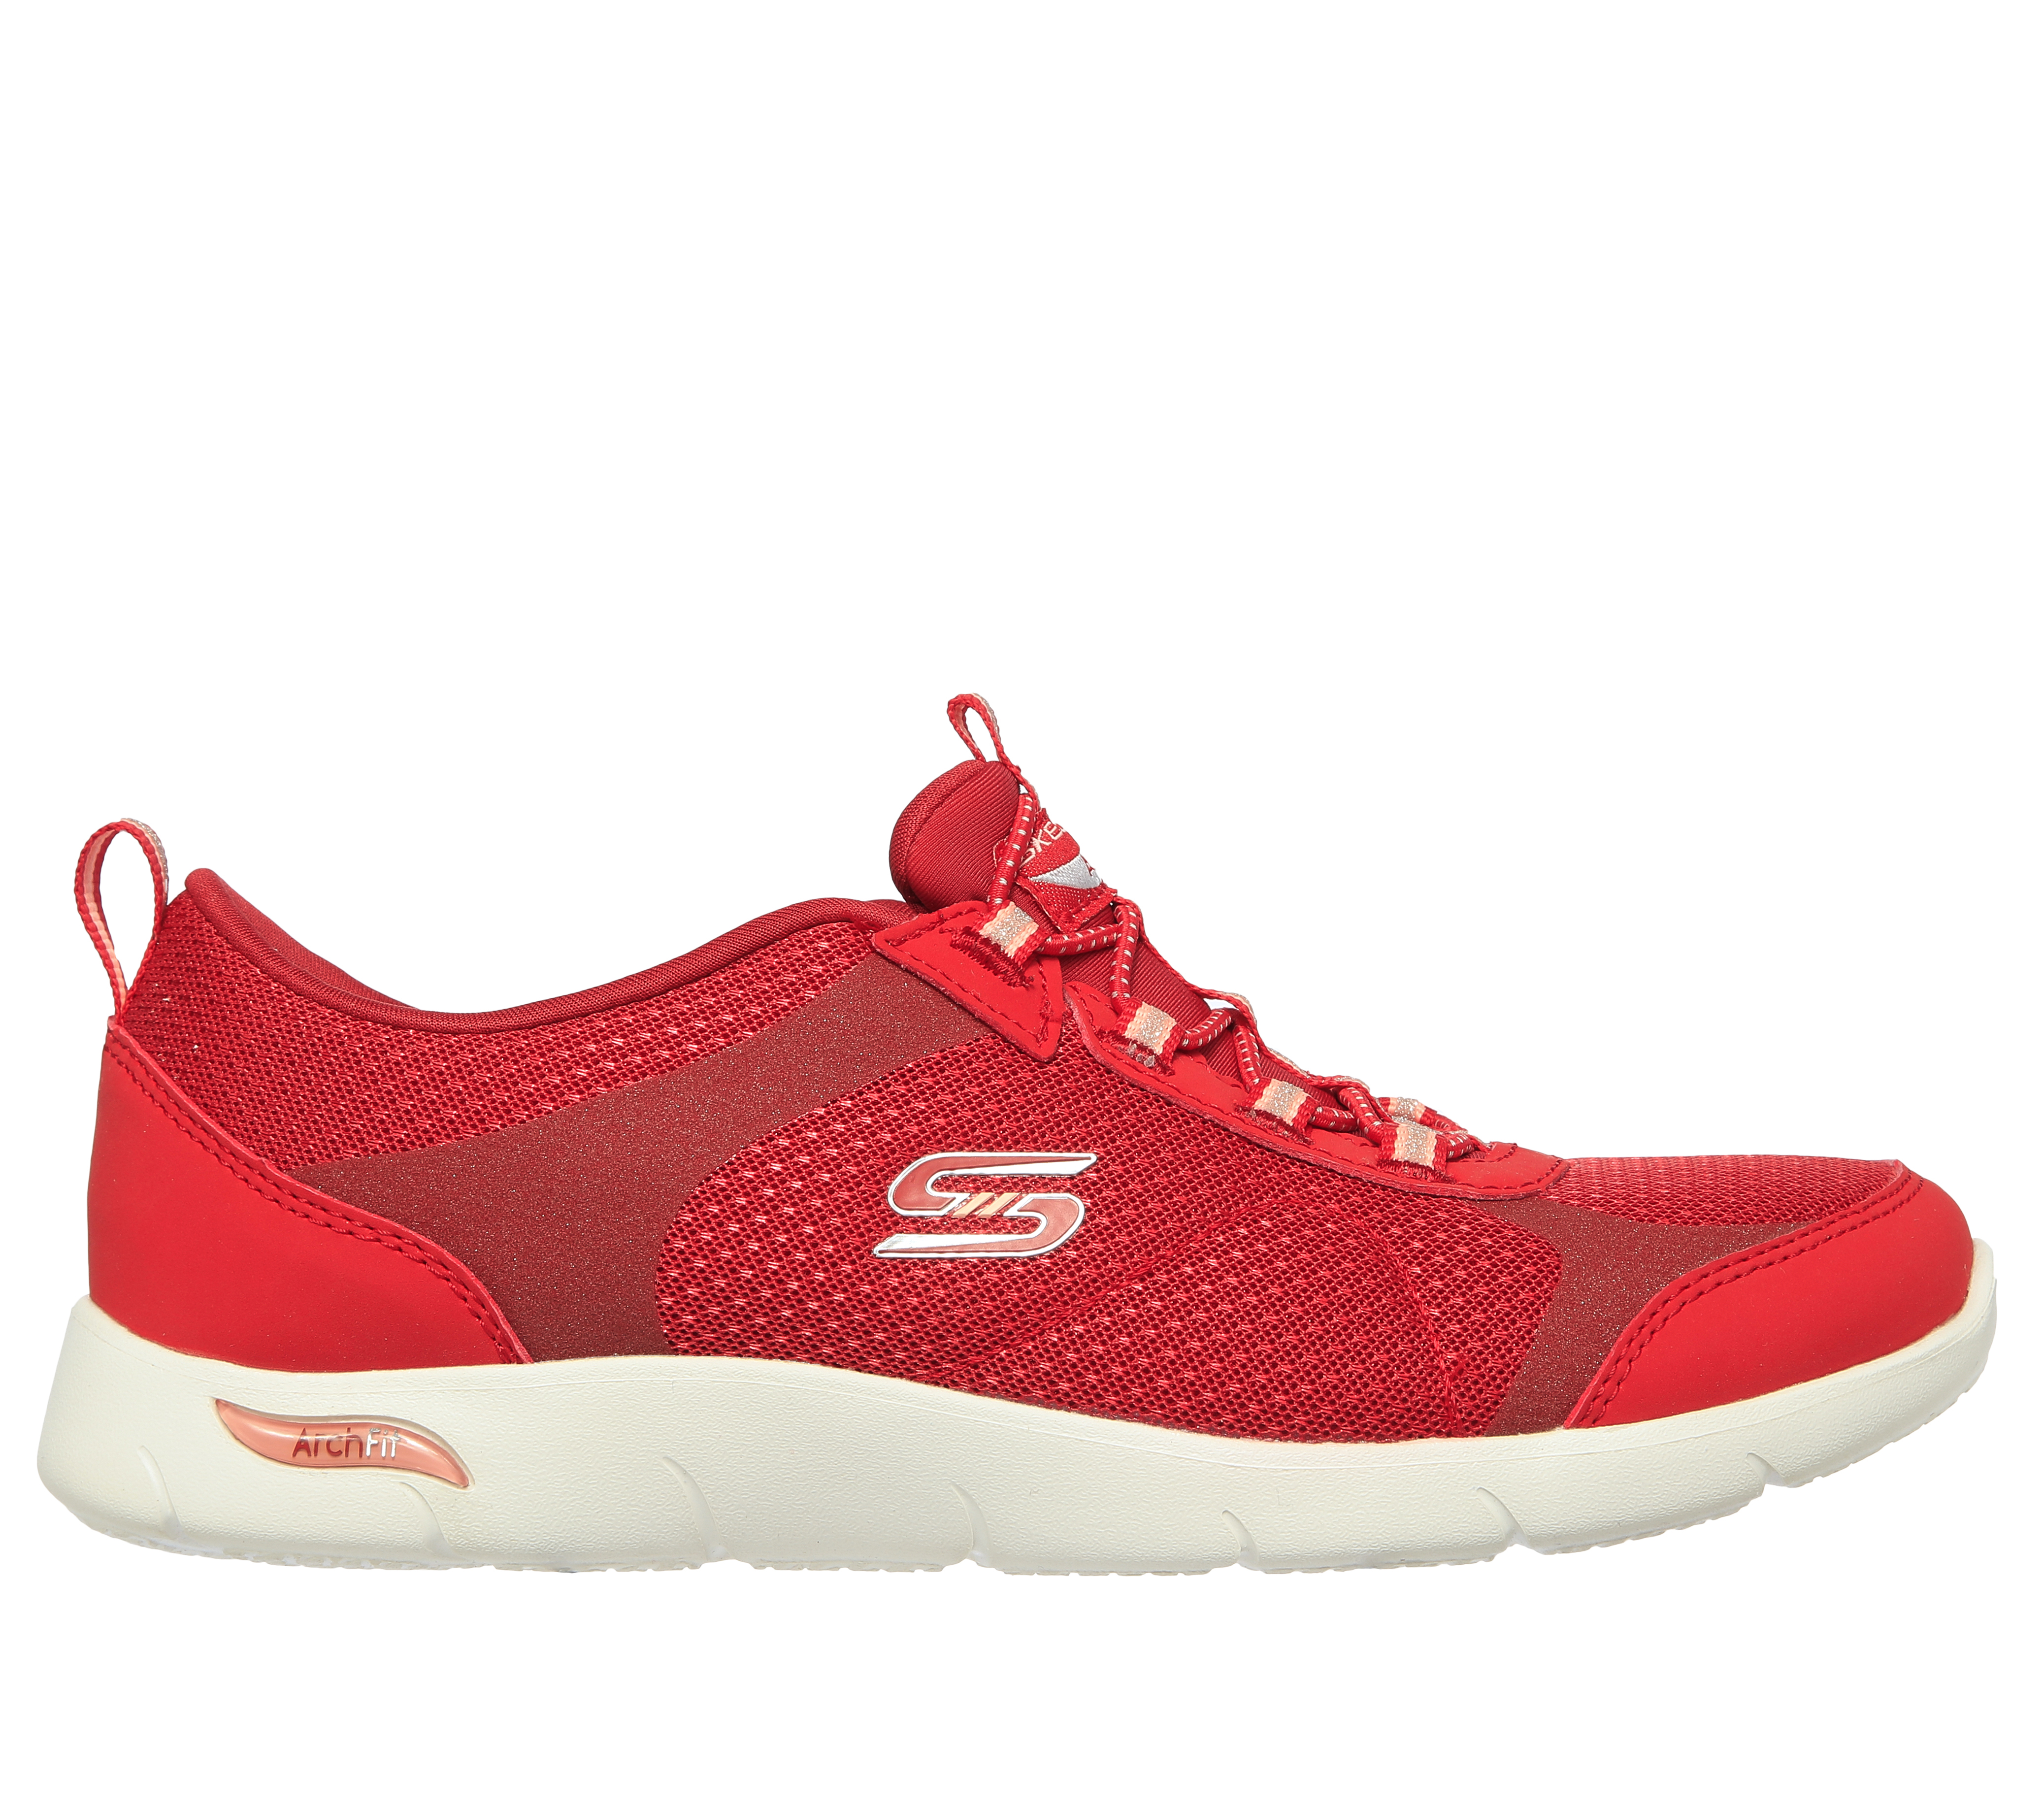 5 Day Best skechers workout shoes for Beginner